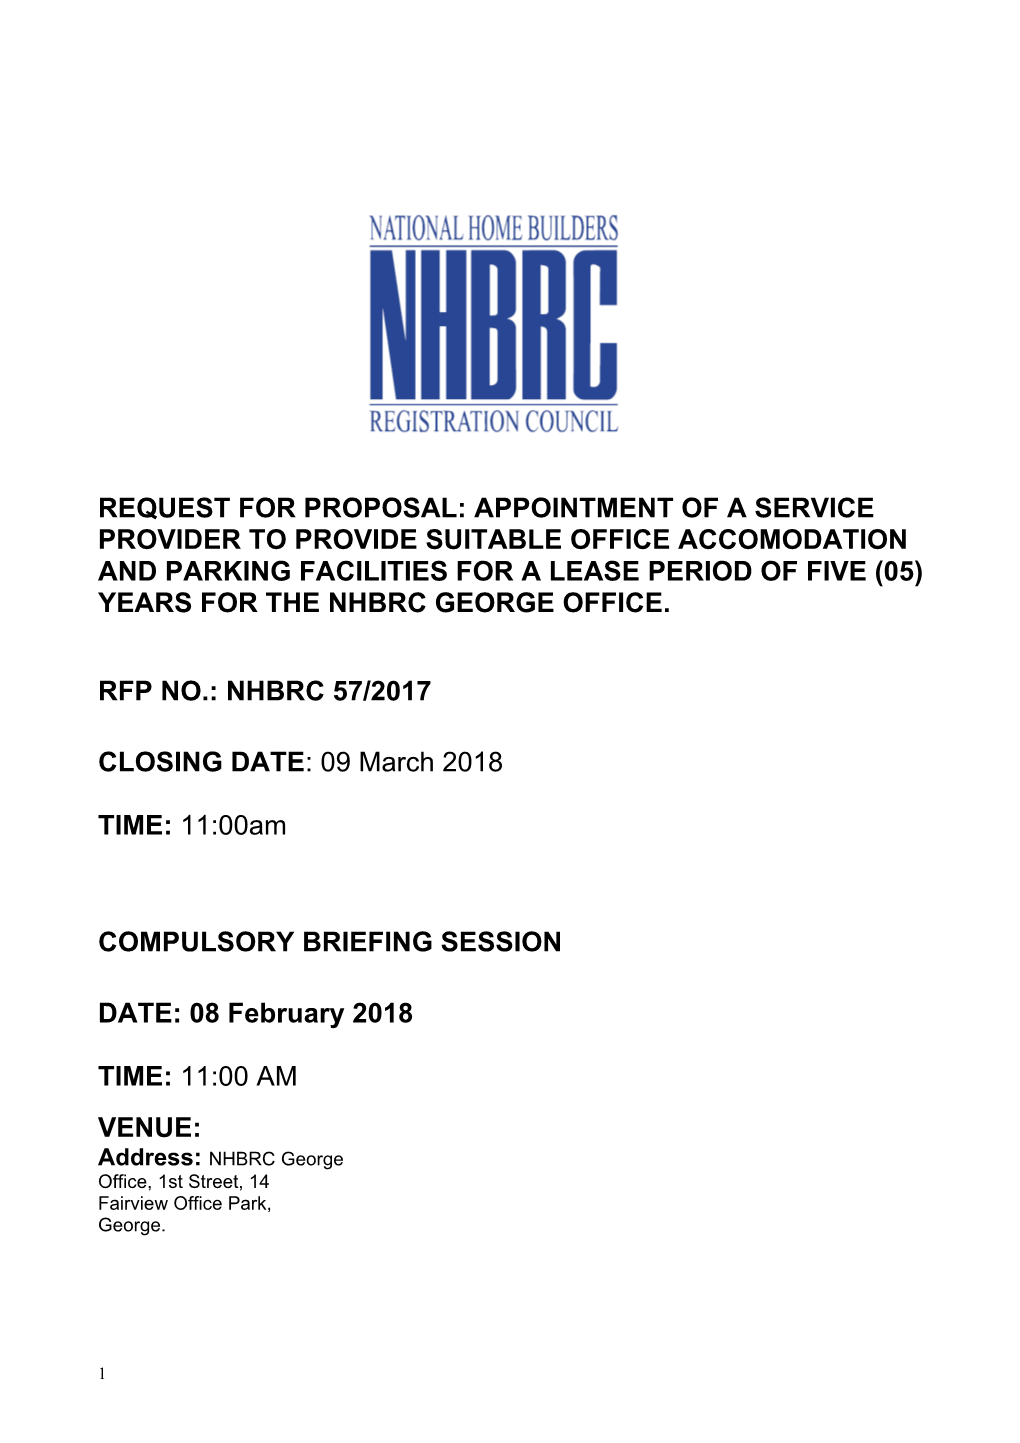 Request for Proposal: Appointment of a Service Provider to Provide Suitable Office Accomodation